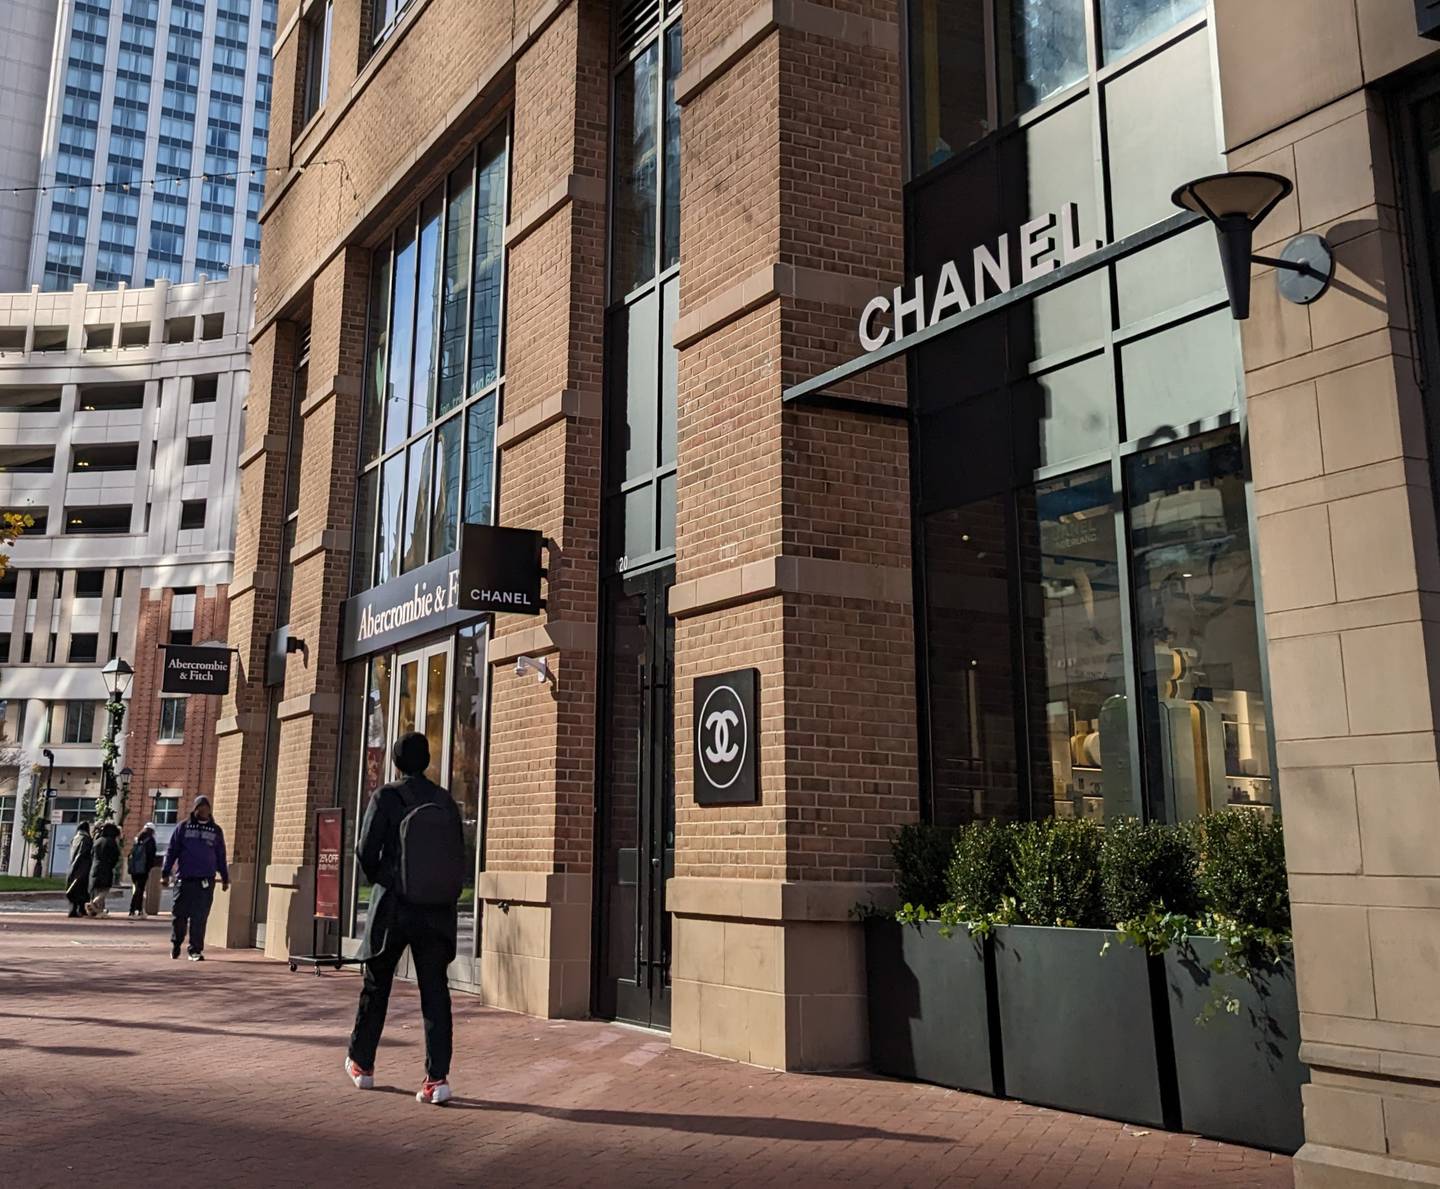 This is a photograph of the Chanel boutique store in Harbor East.